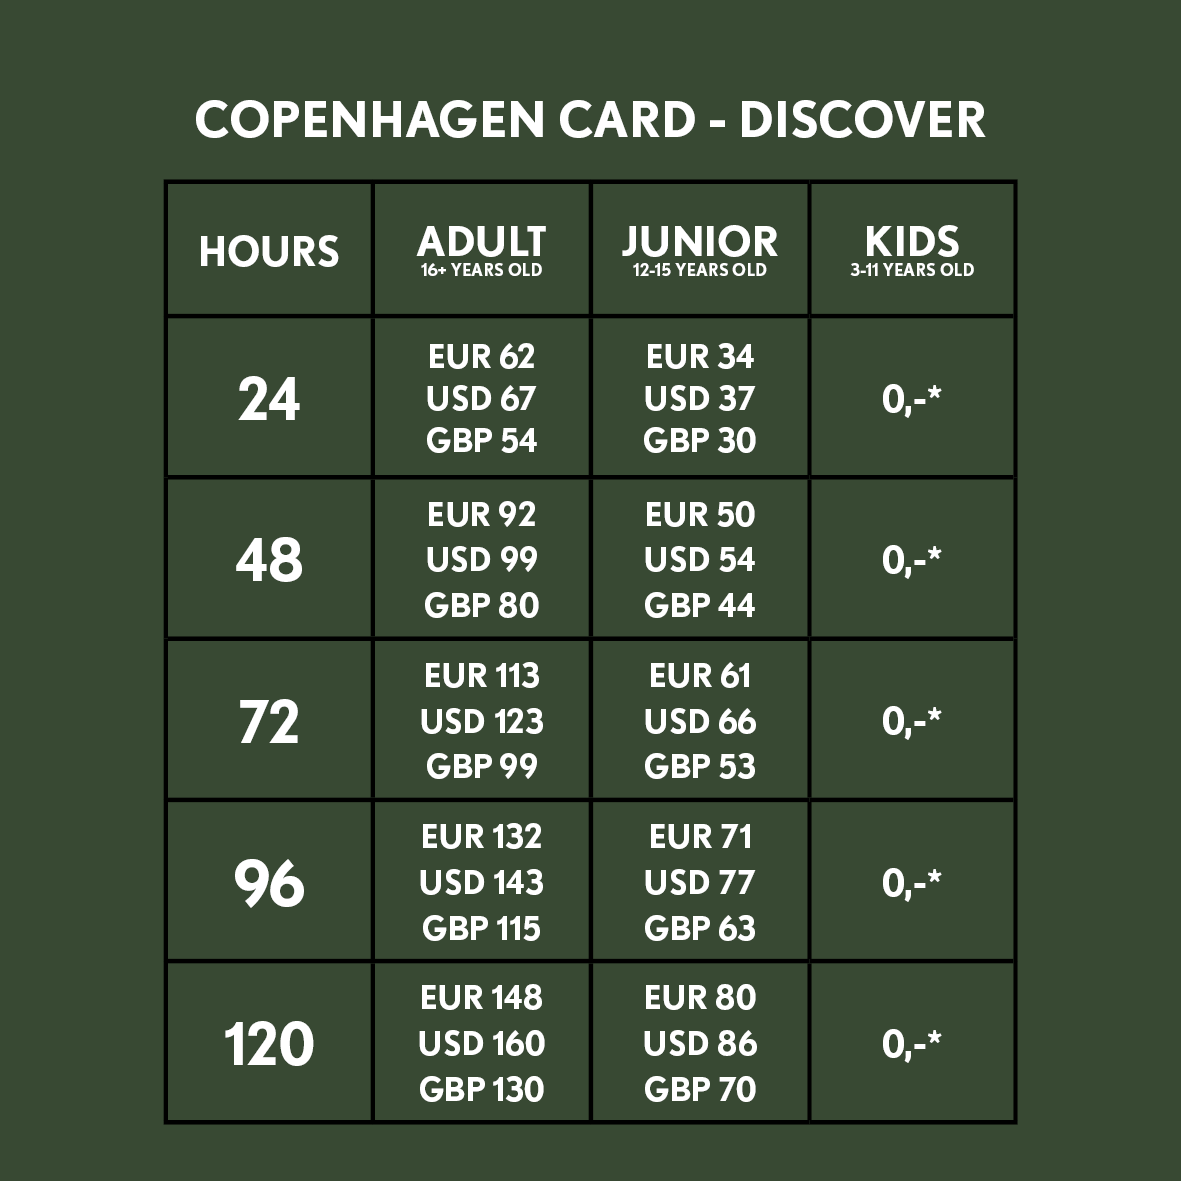 Price overview for Copenhagen Card DISCOVER